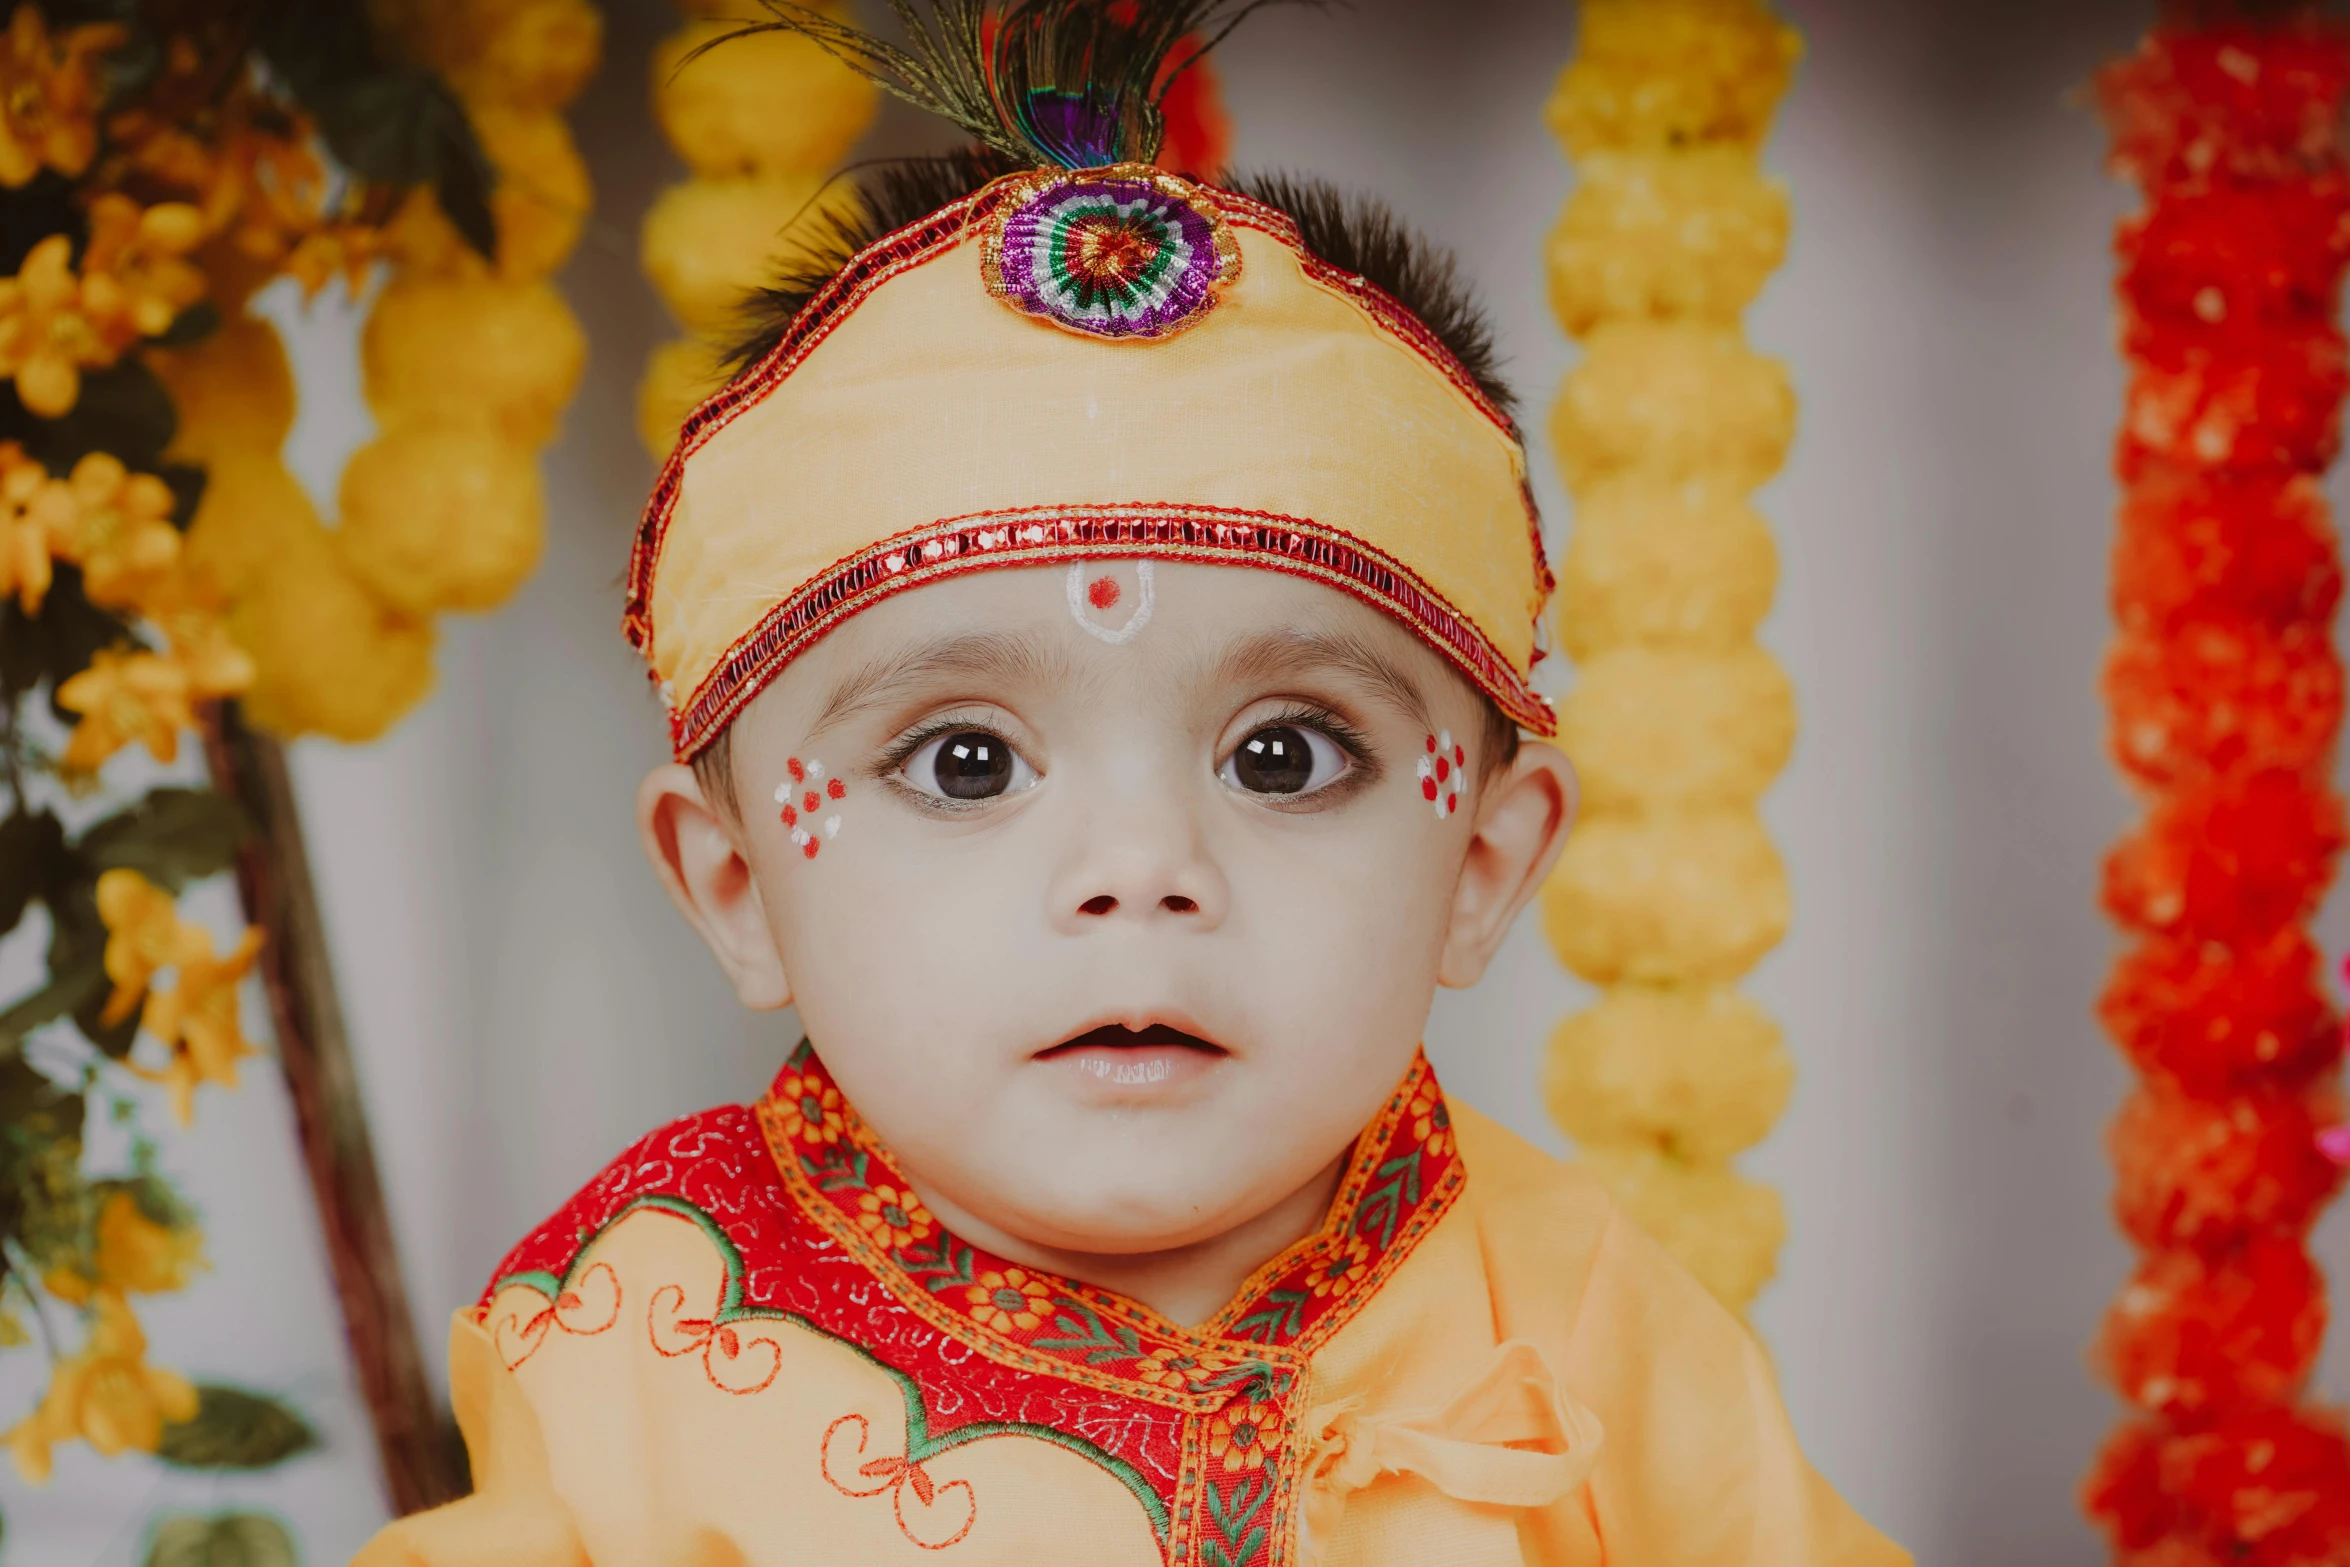 a baby dressed up wearing a yellow outfit and colorful headdress